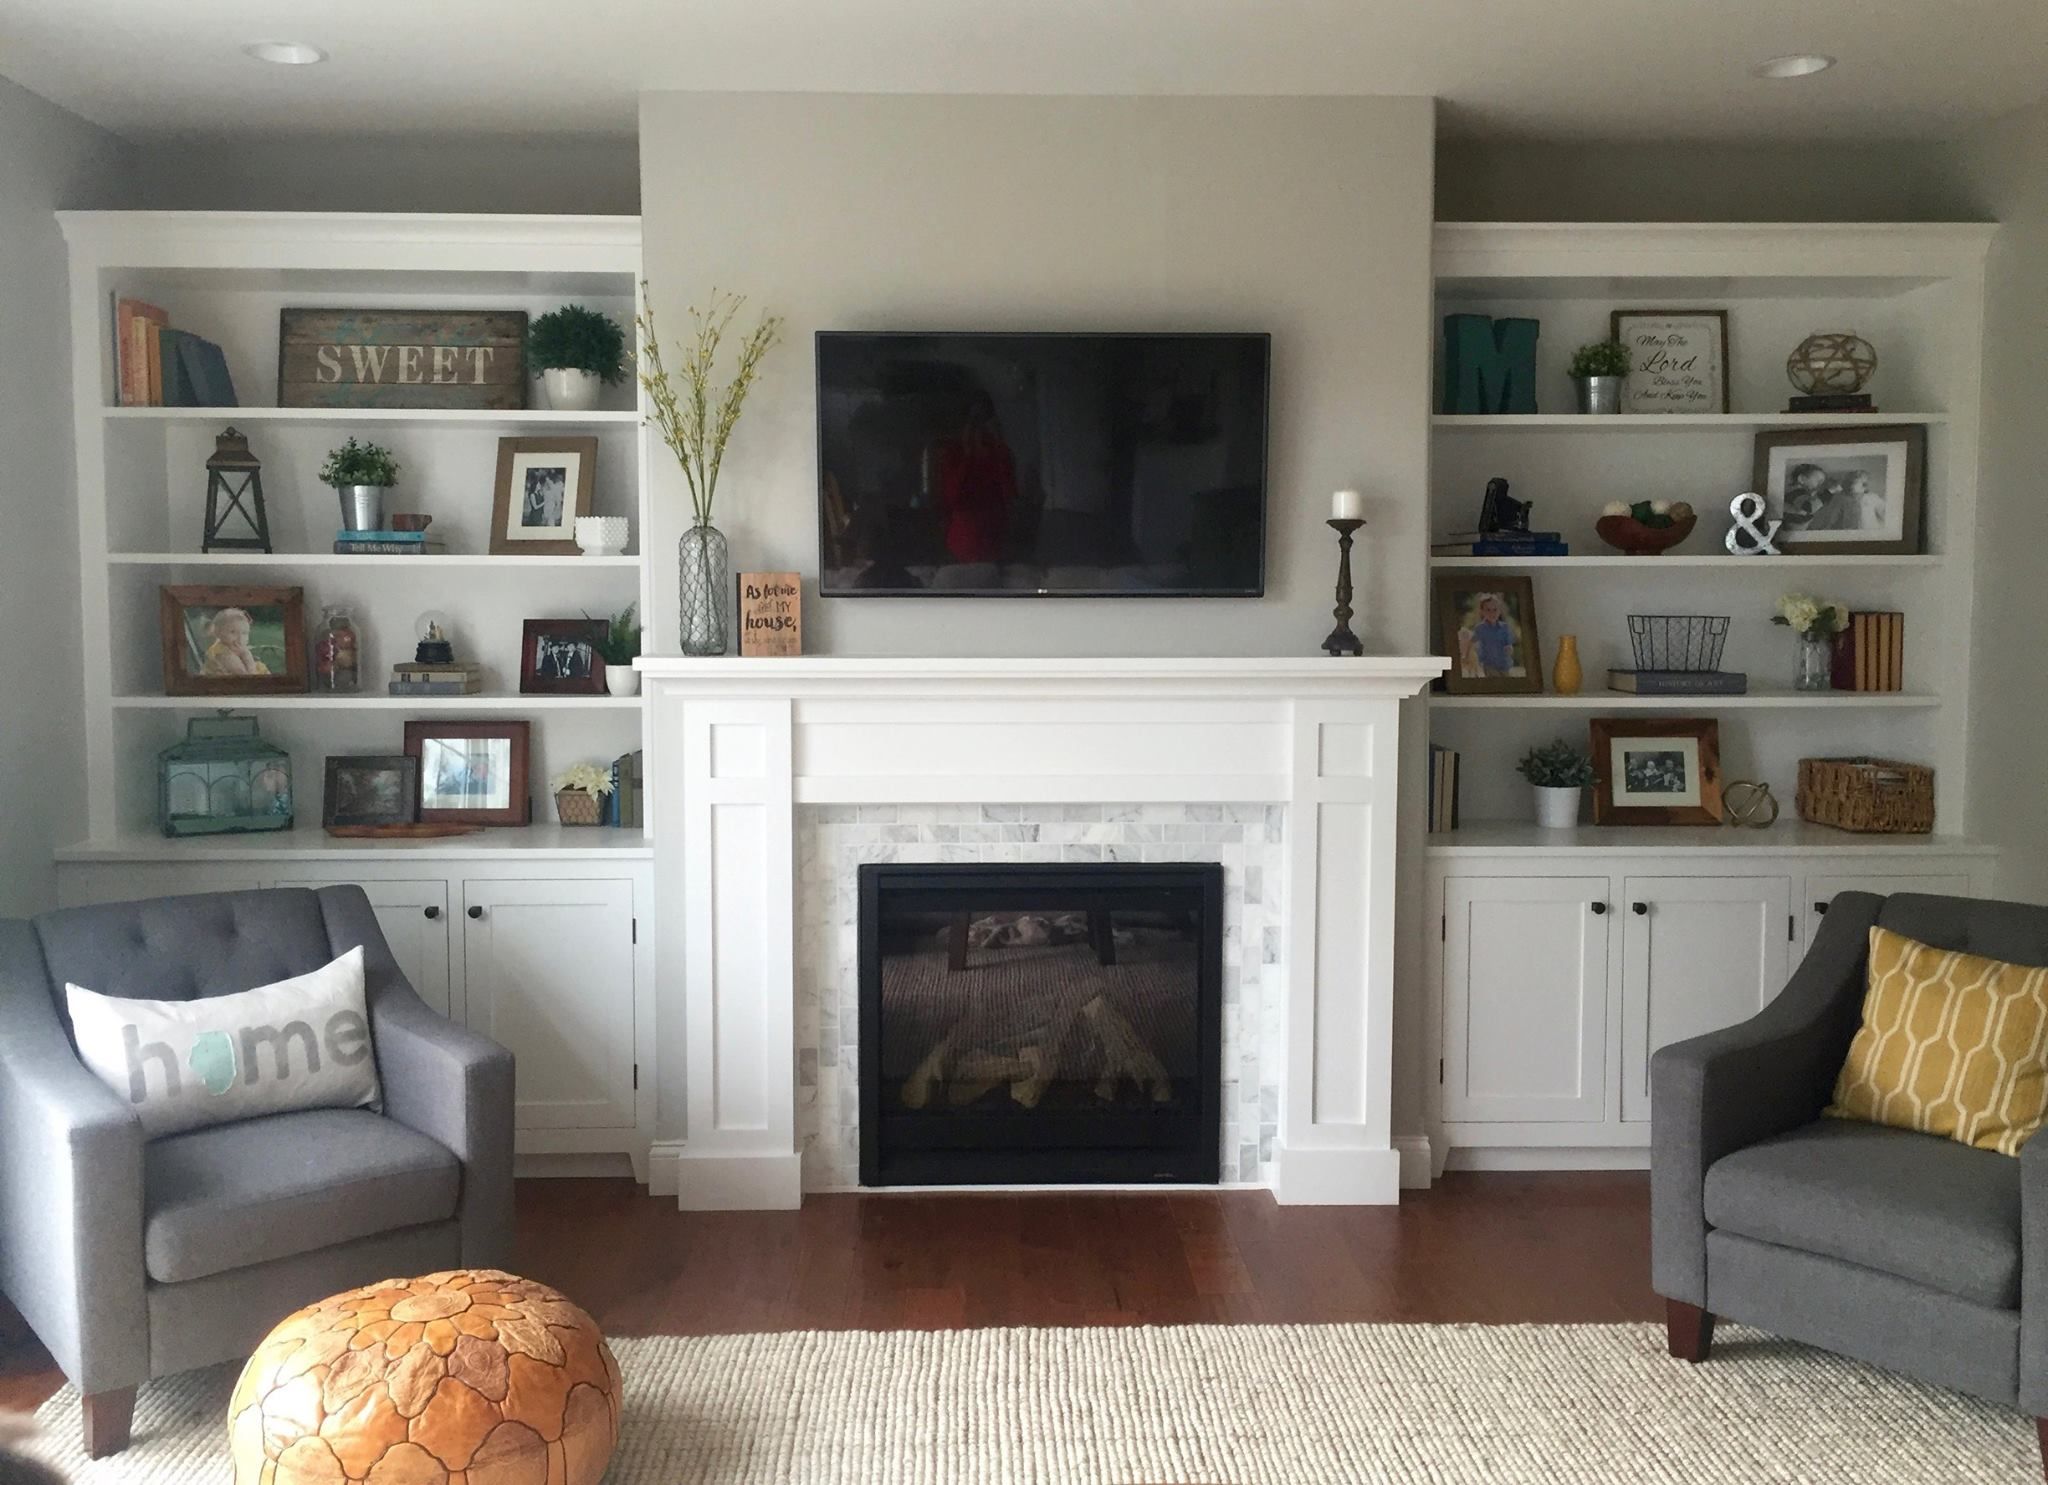 Wainscoting Fireplace Awesome Instructions to Build This Fireplace Mantel with Built In